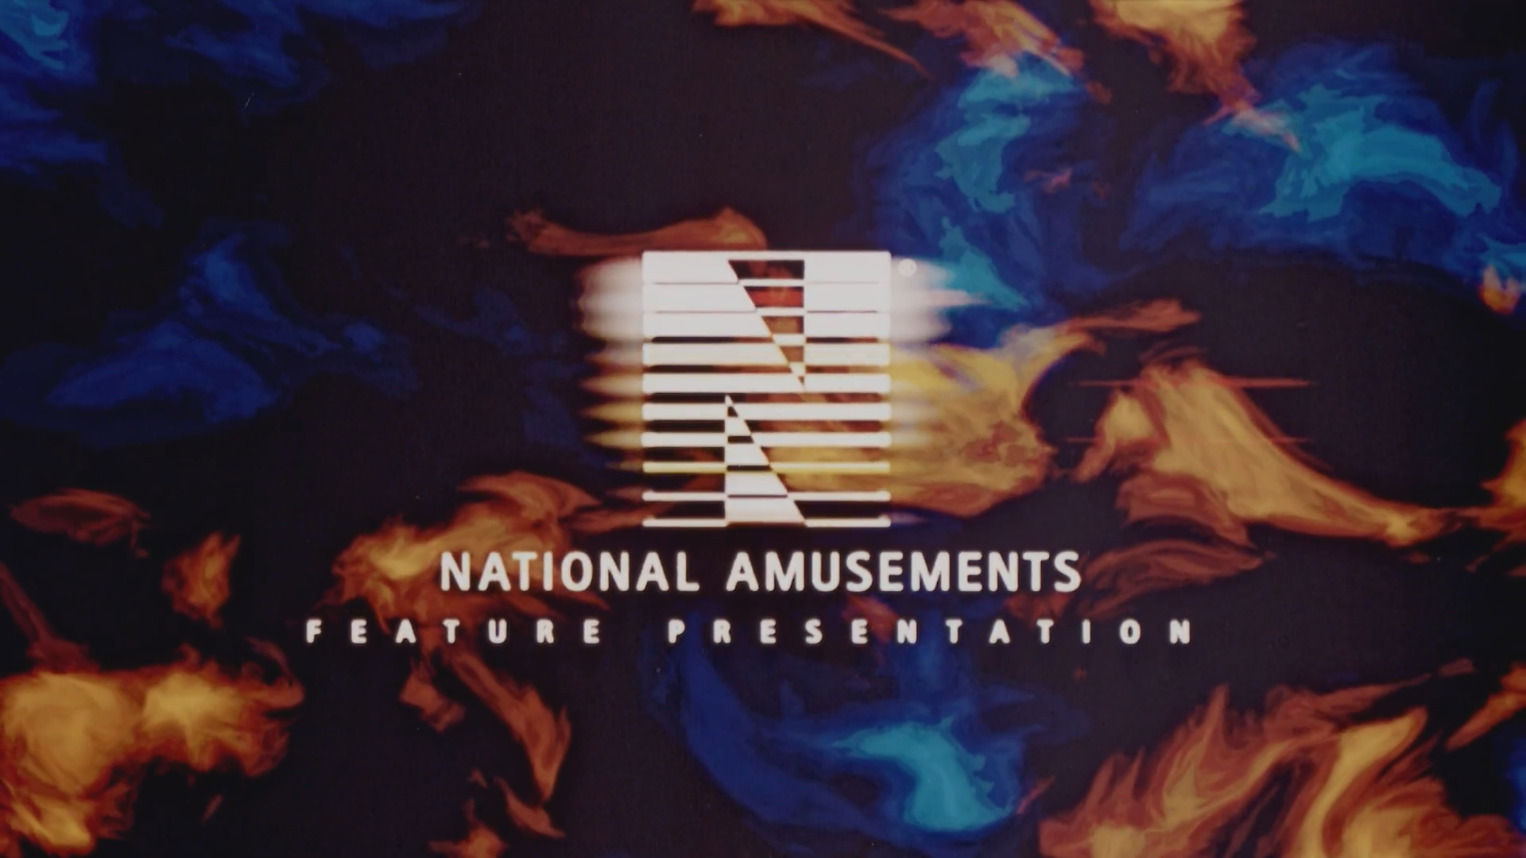 National Amusements Feature Presentation ident - National Amusements (found Feature Presentation ident logo of theater company; 2000s)